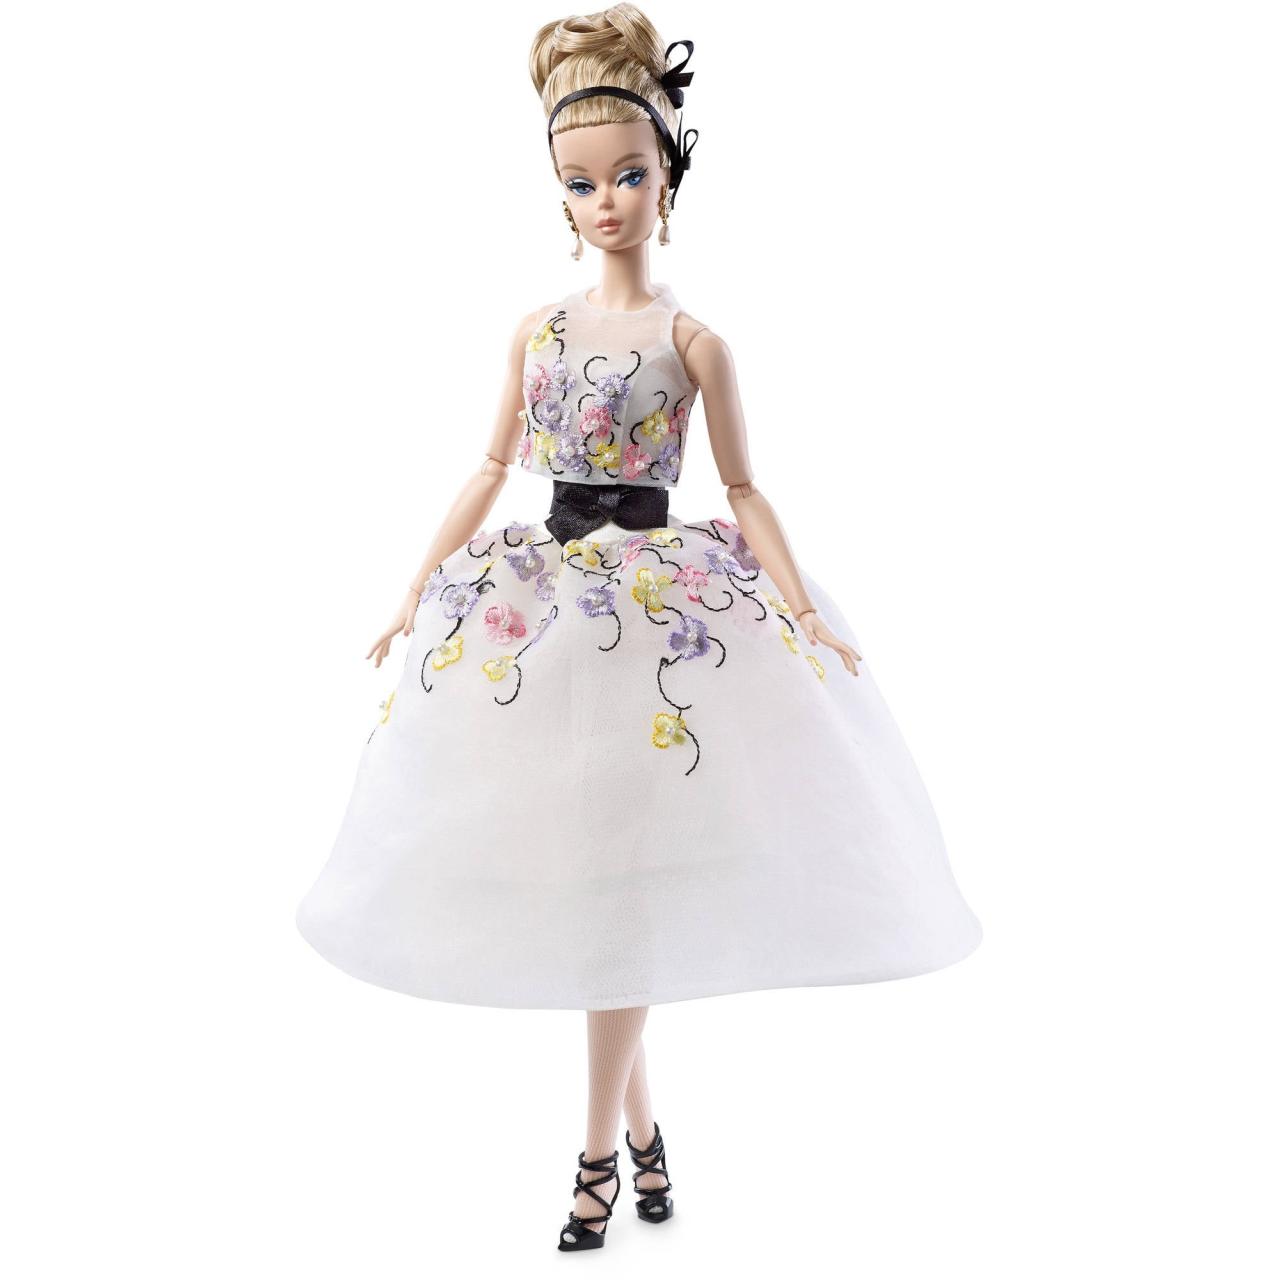 Barbie fashion model collection